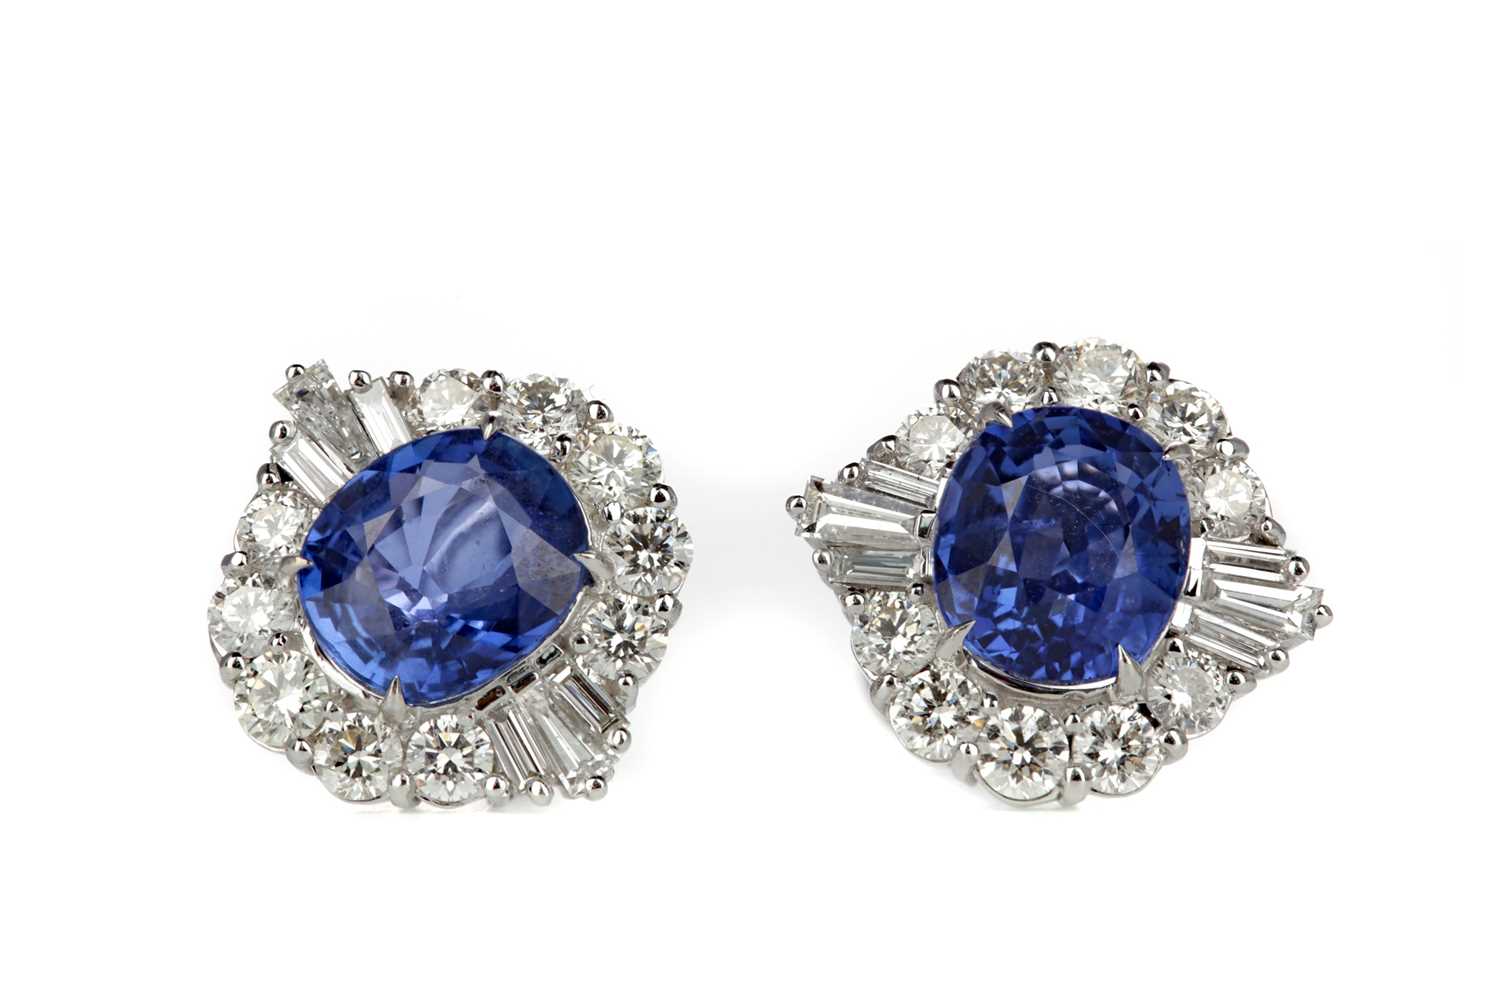 Lot 477 - A PAIR OF SAPPHIRE AND DIAMOND EARRINGS